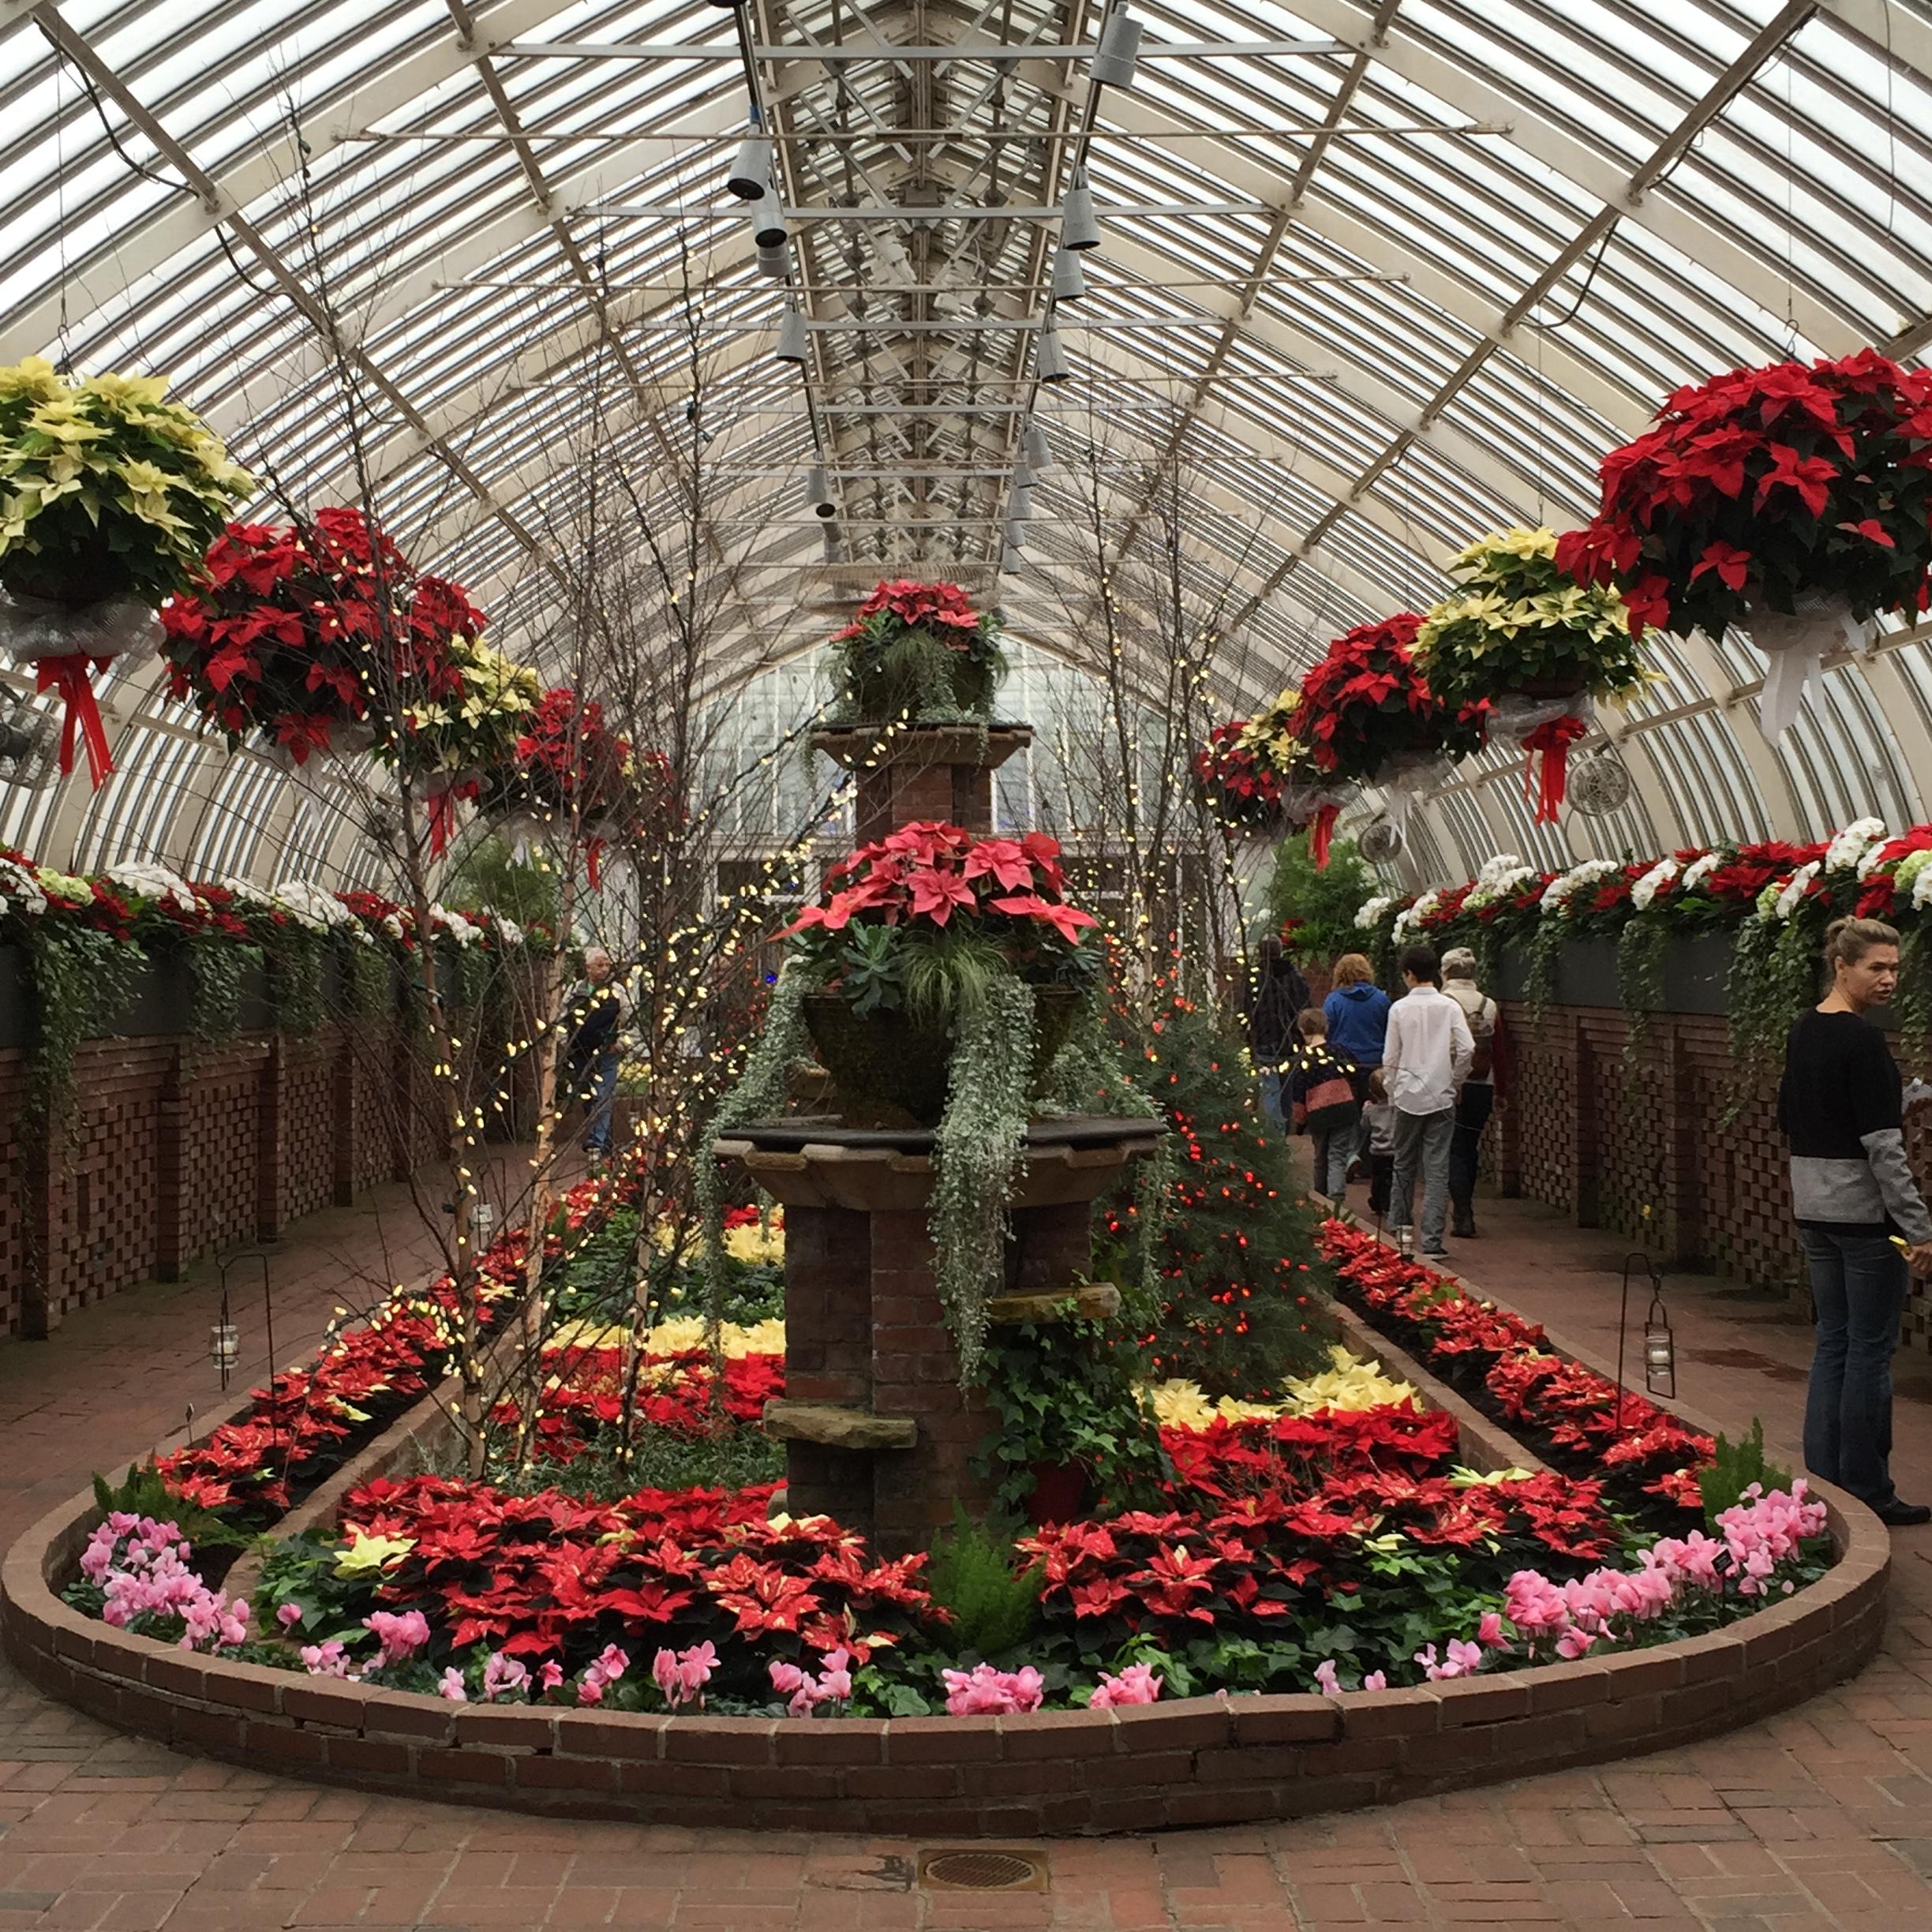 Cover image of this place Phipps Conservatory and Botanical Gardens